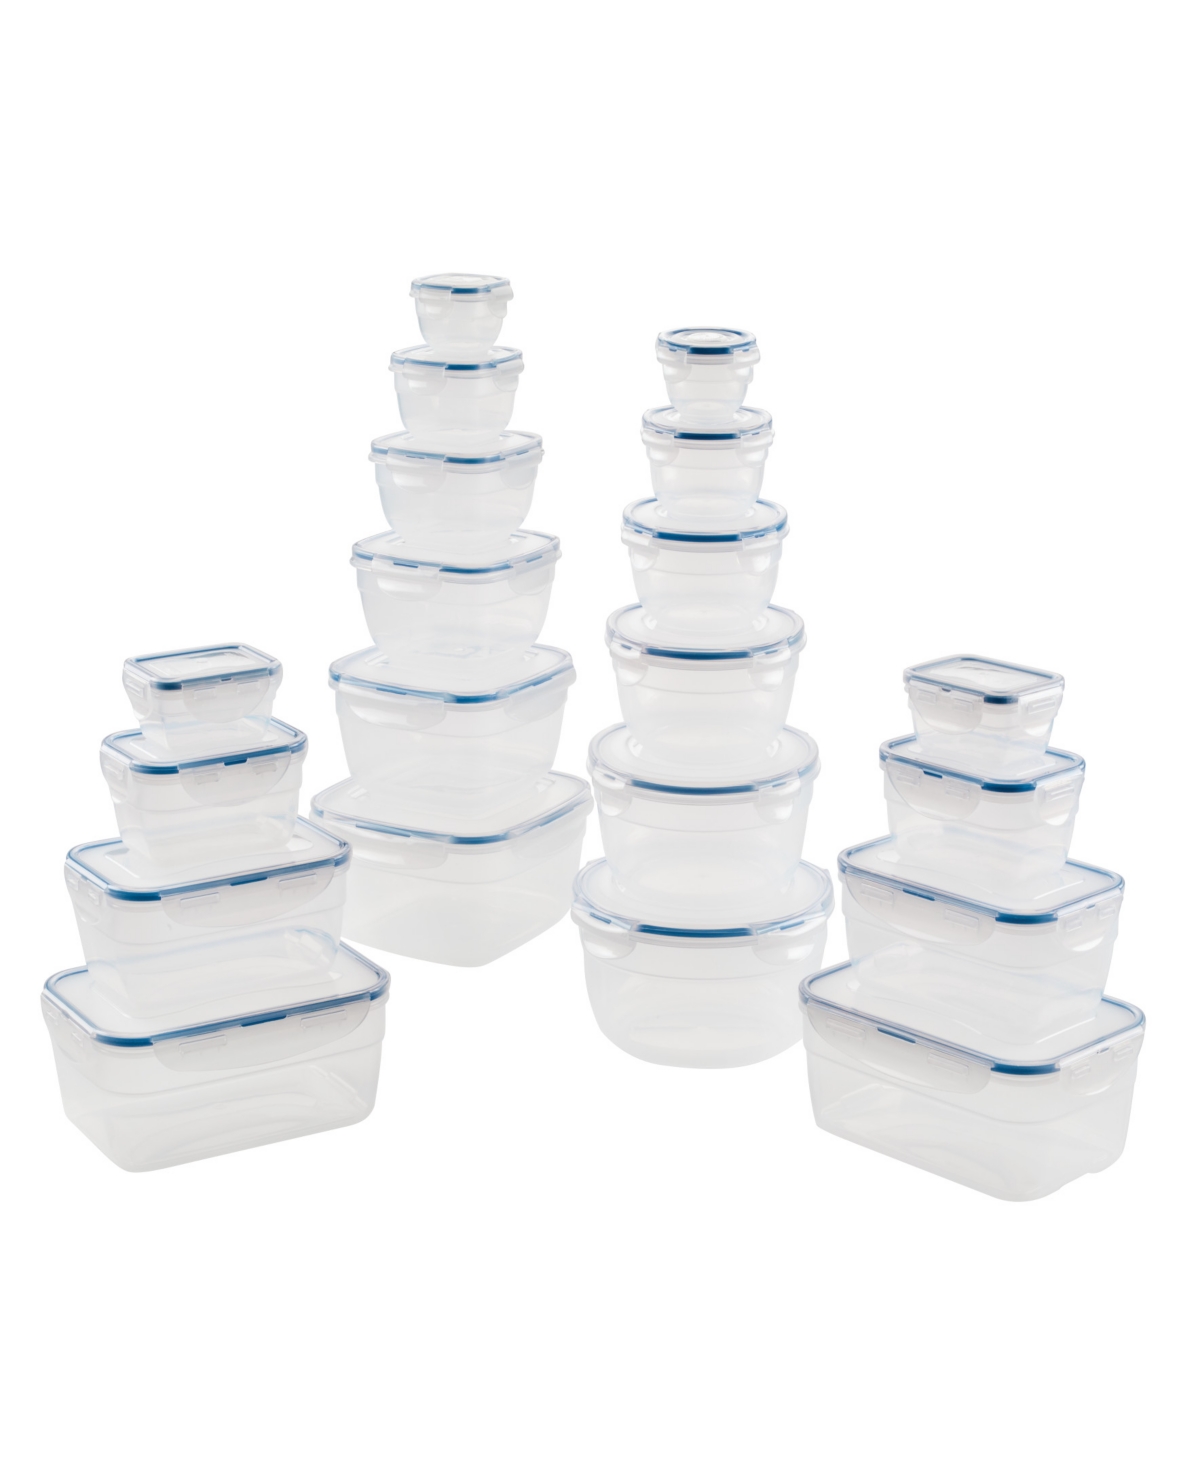 Easy Essentials 40-Pc. Nestable Food Storage Container Set - Clear